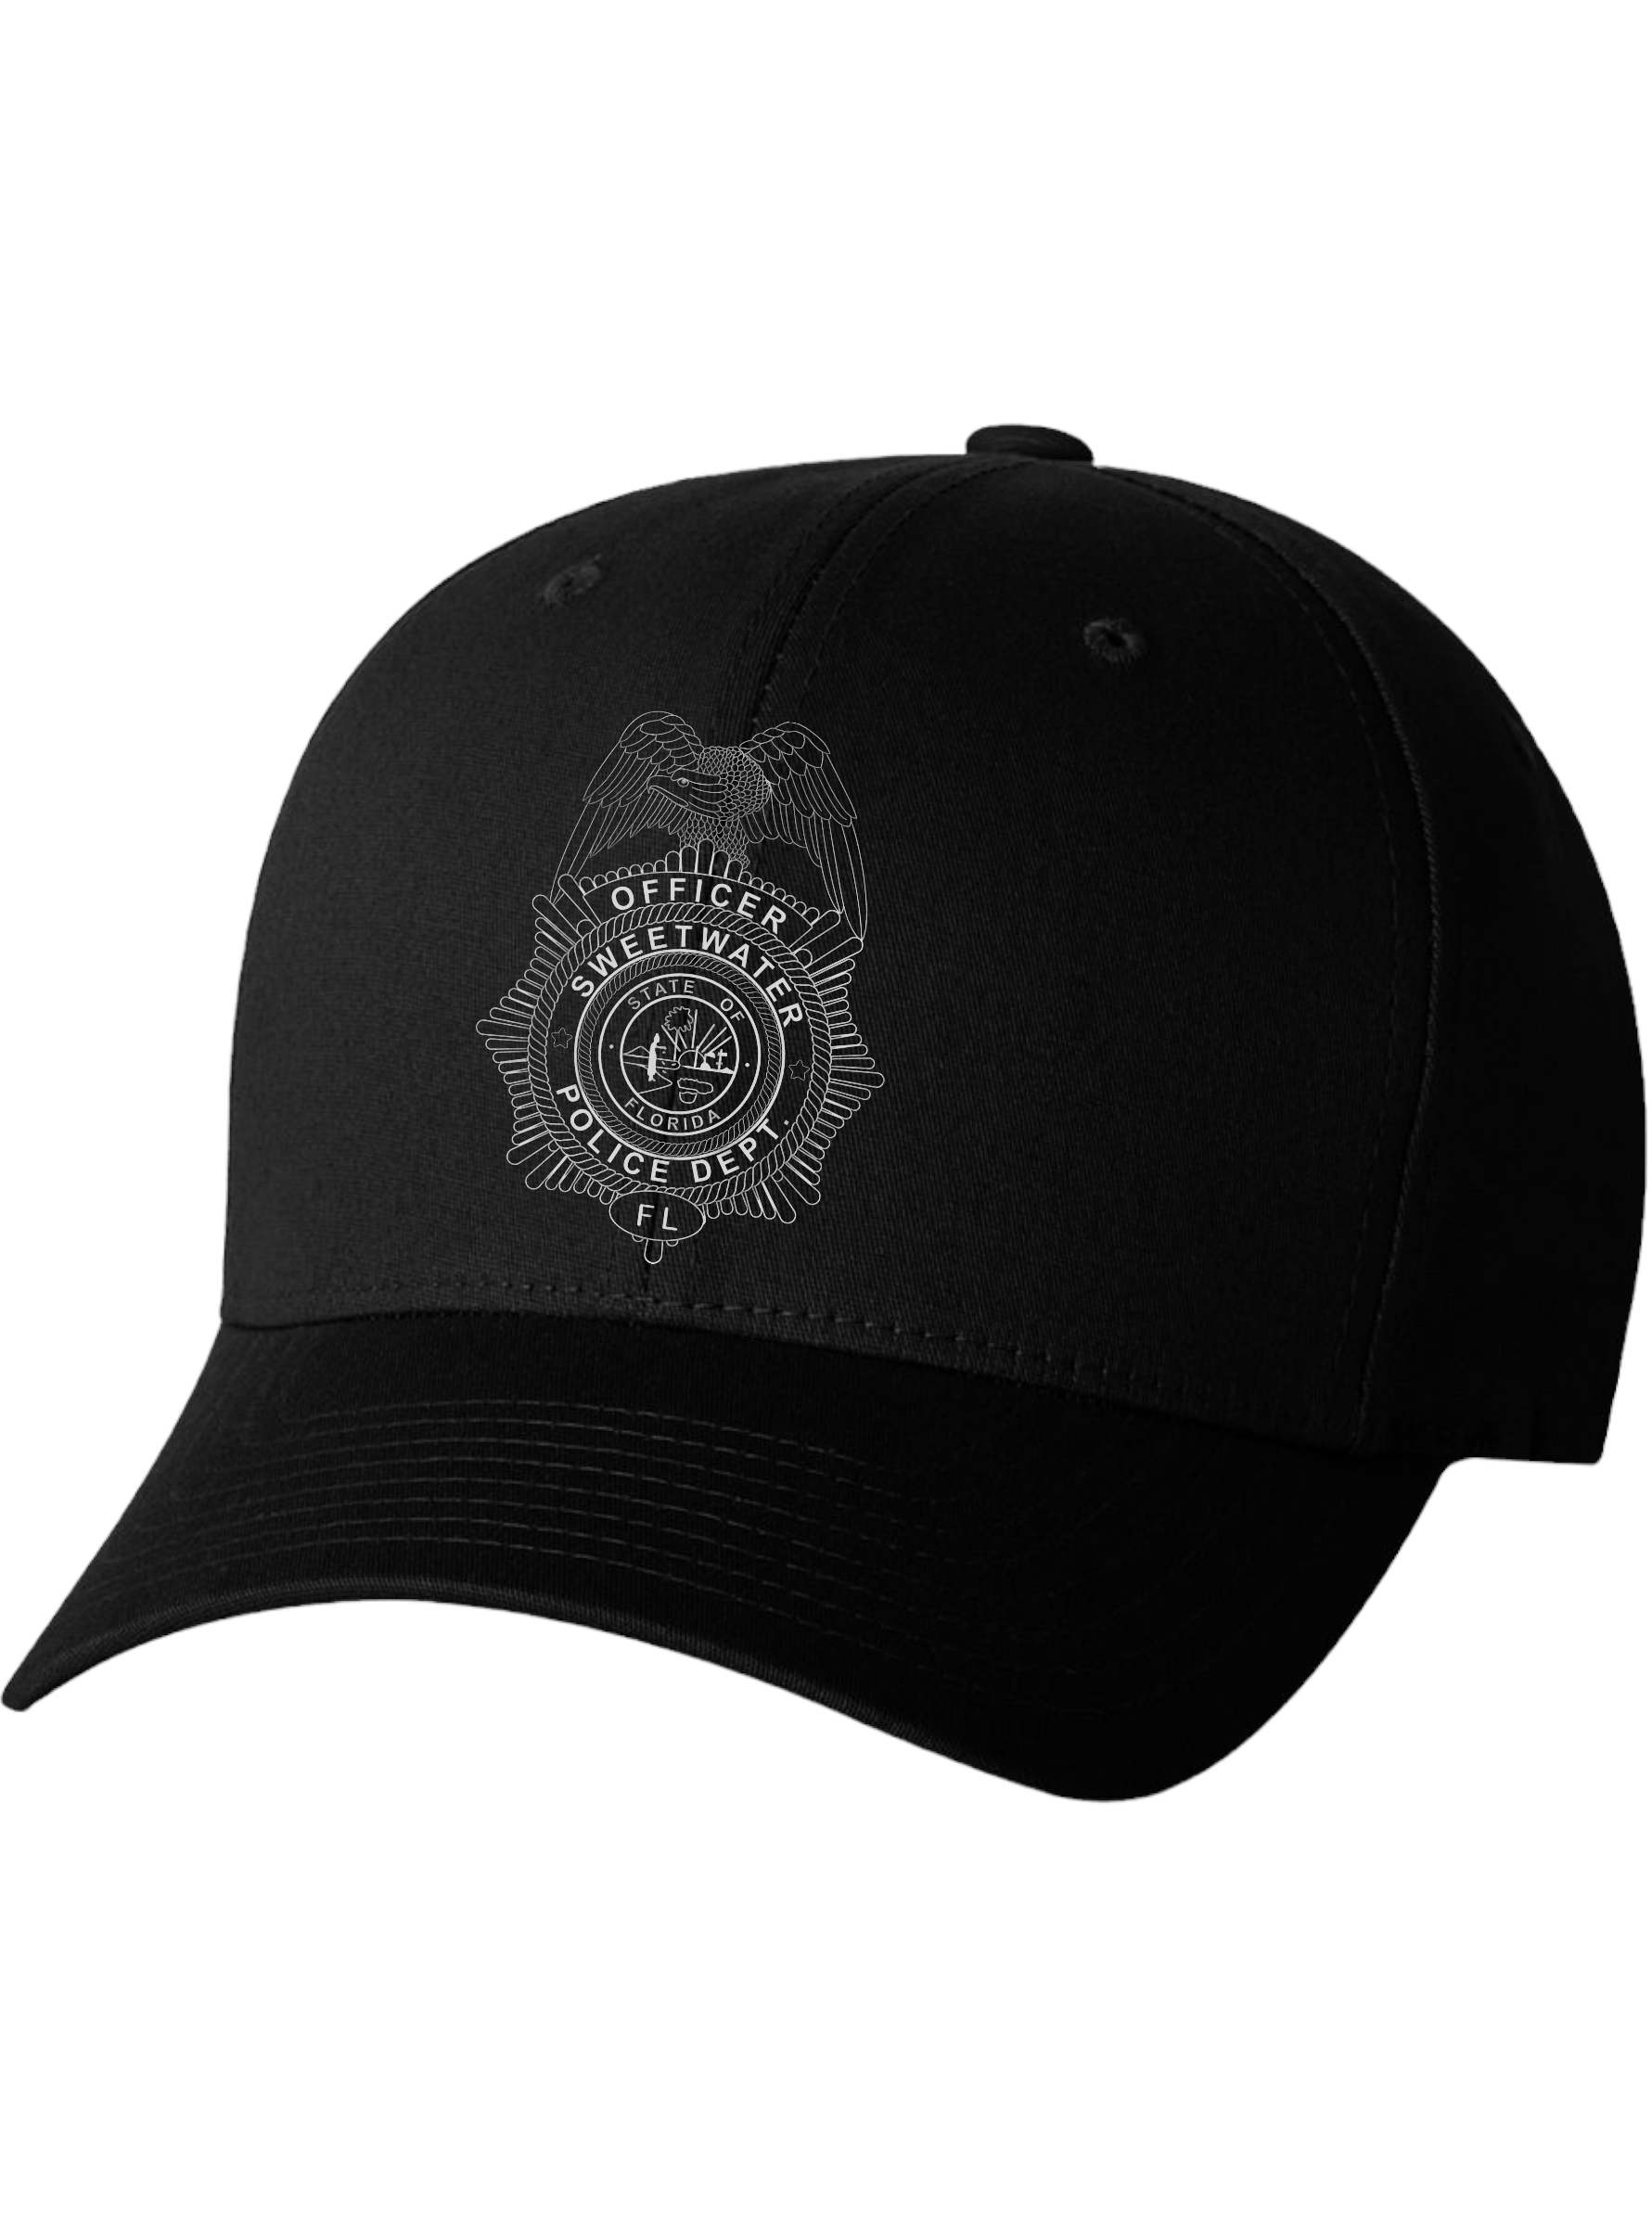 Sweetwater Police Department V-Flex Twill Cap